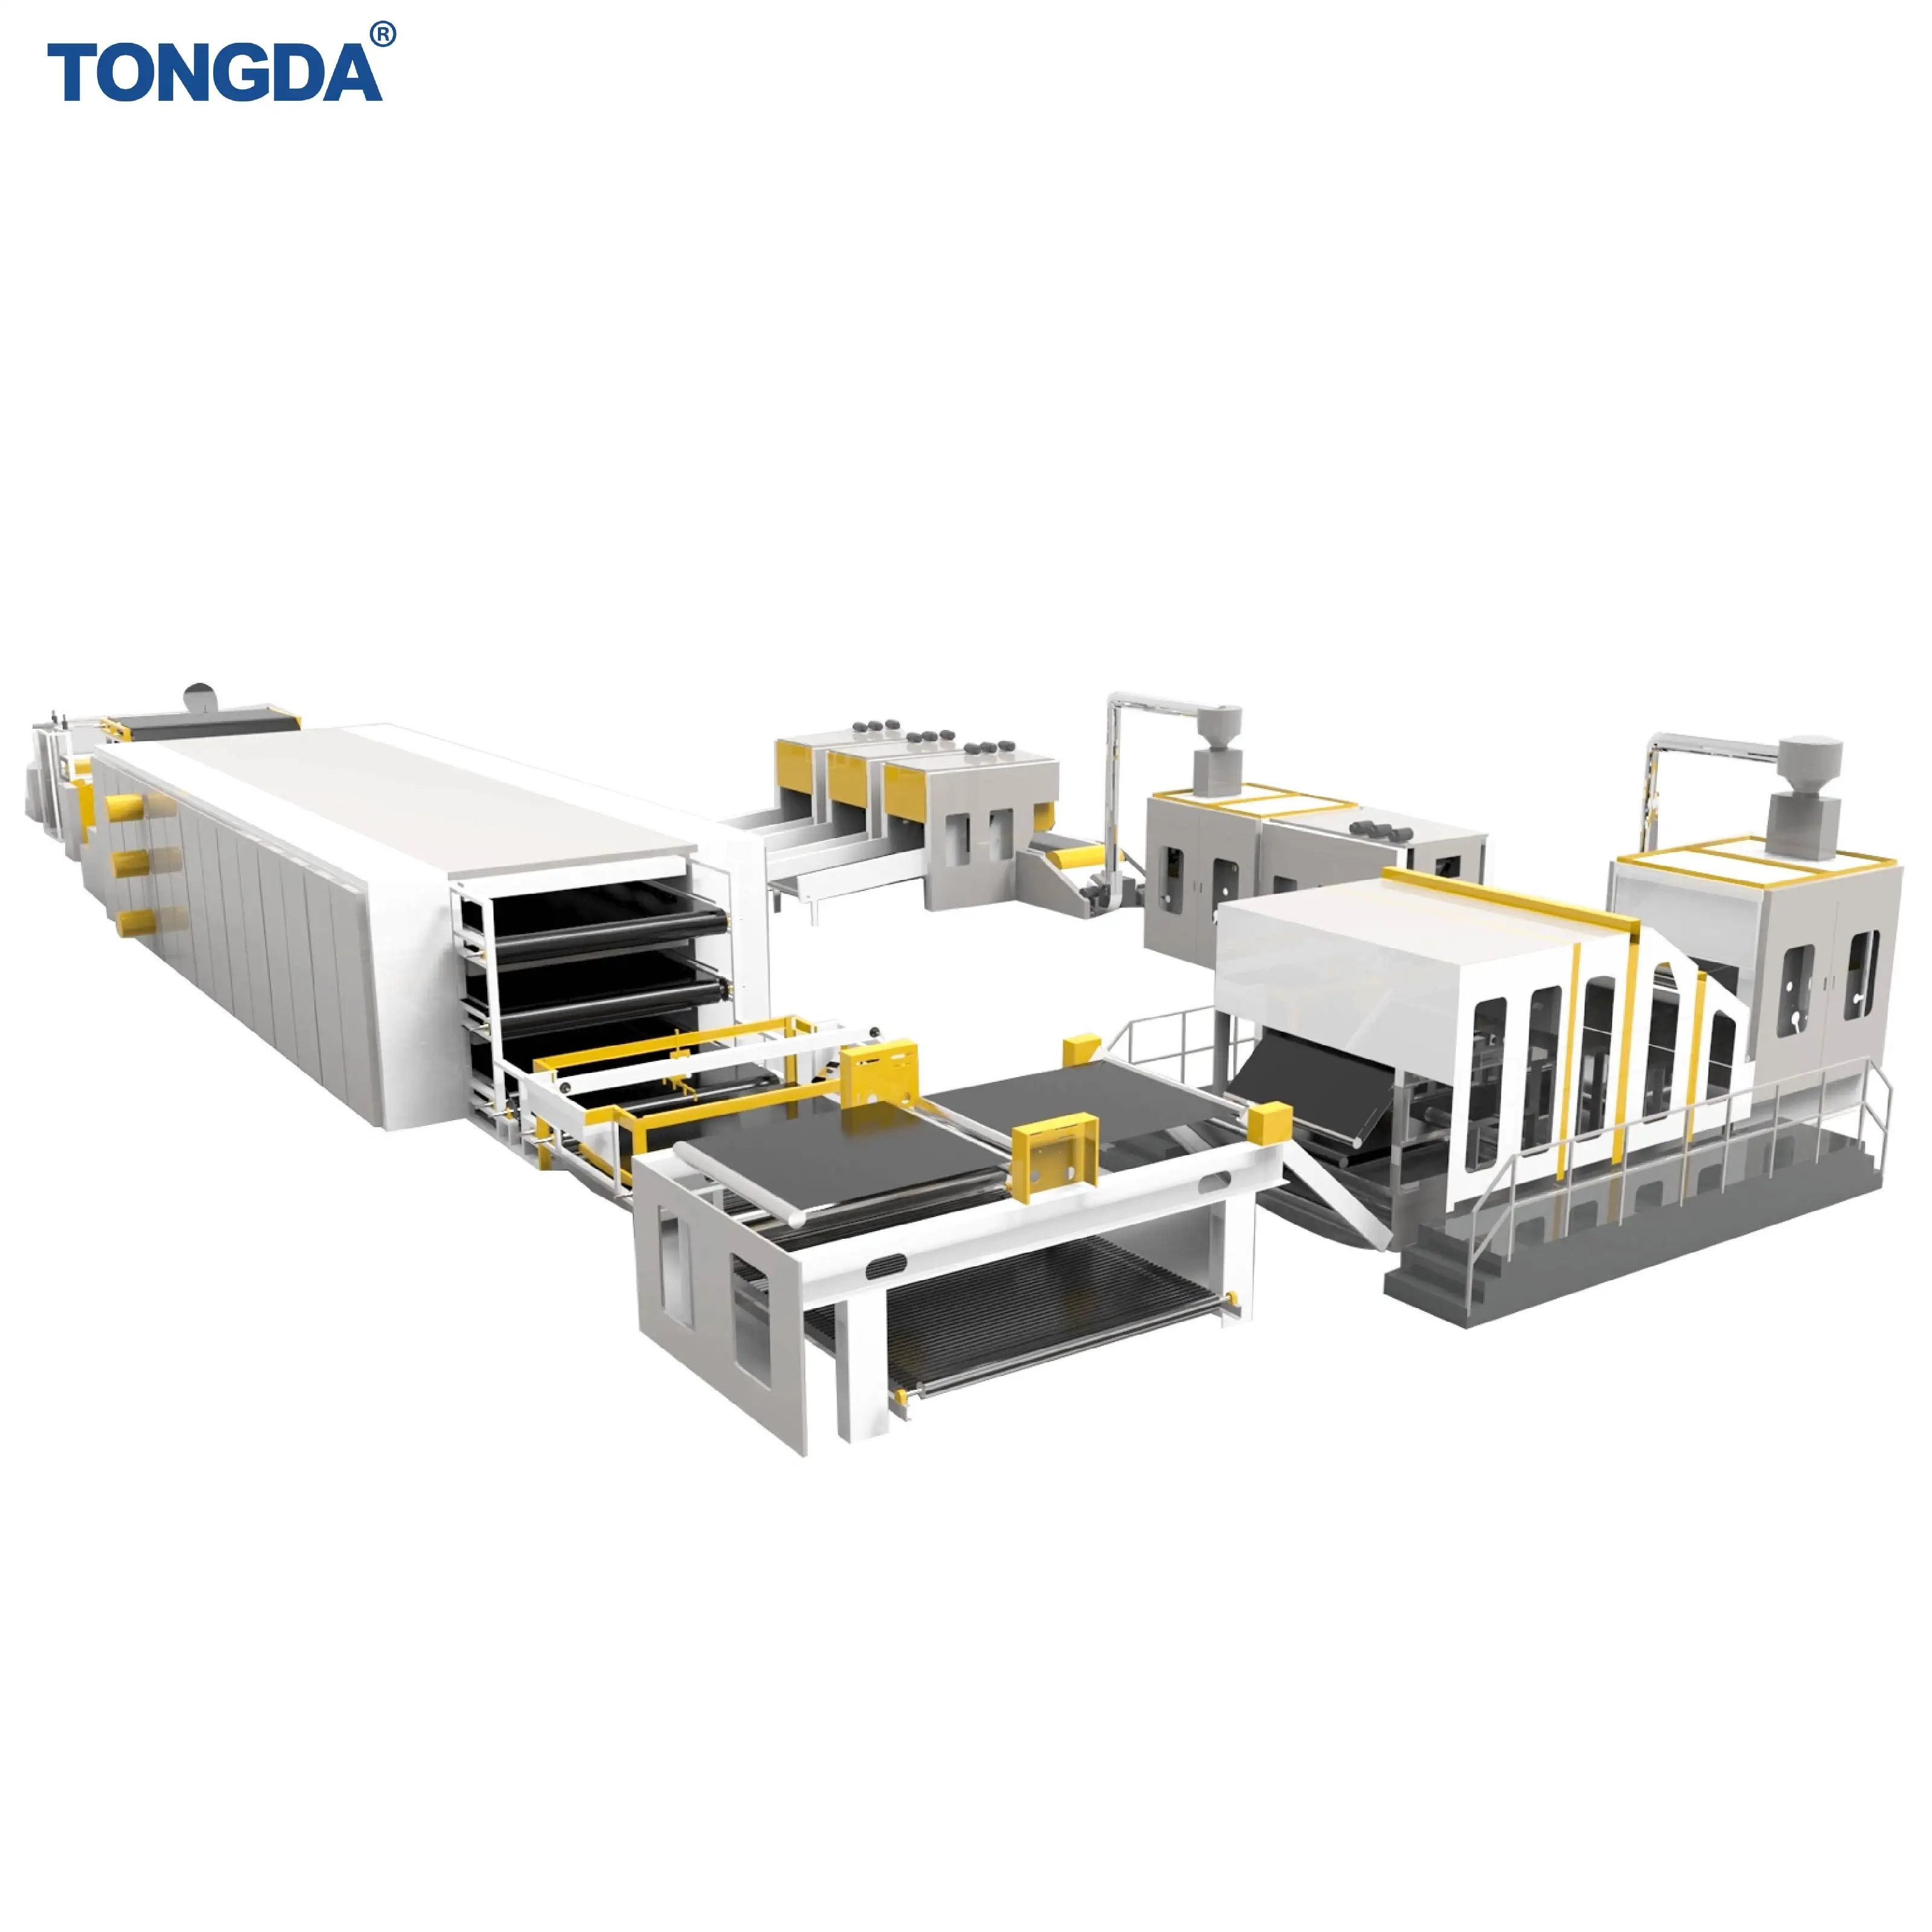 Nonwoven production line thermal bonded heating oventhermo bonding carpet making nonwoven machine